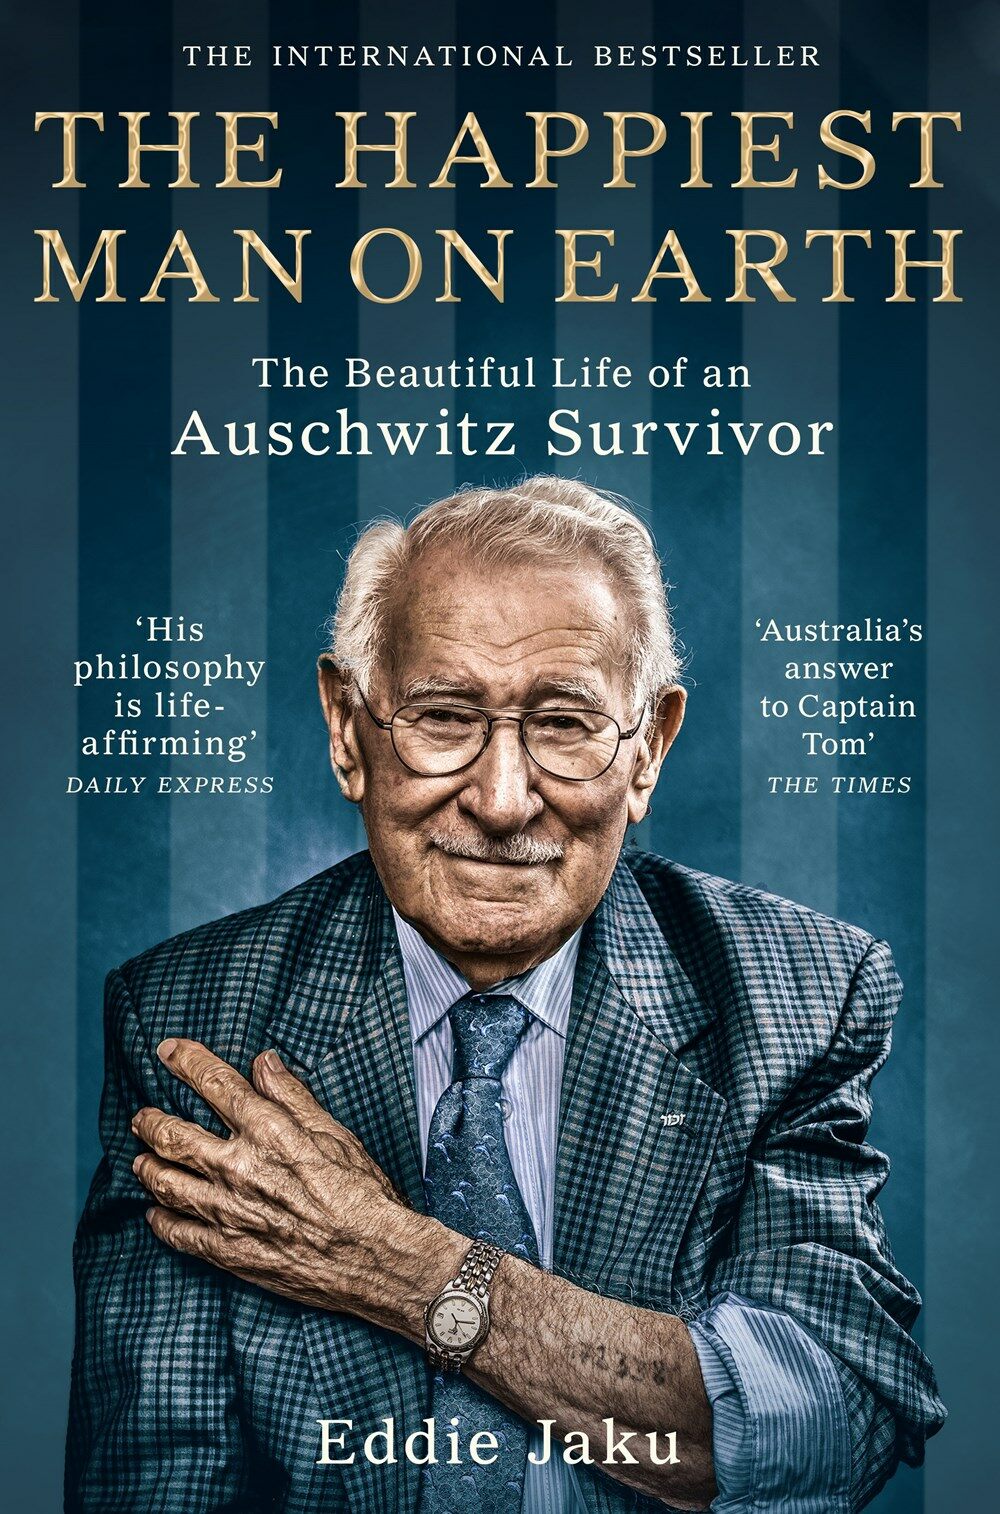 (The) happiest man on earth : (the) beautiful life of an Auschwitz survivor